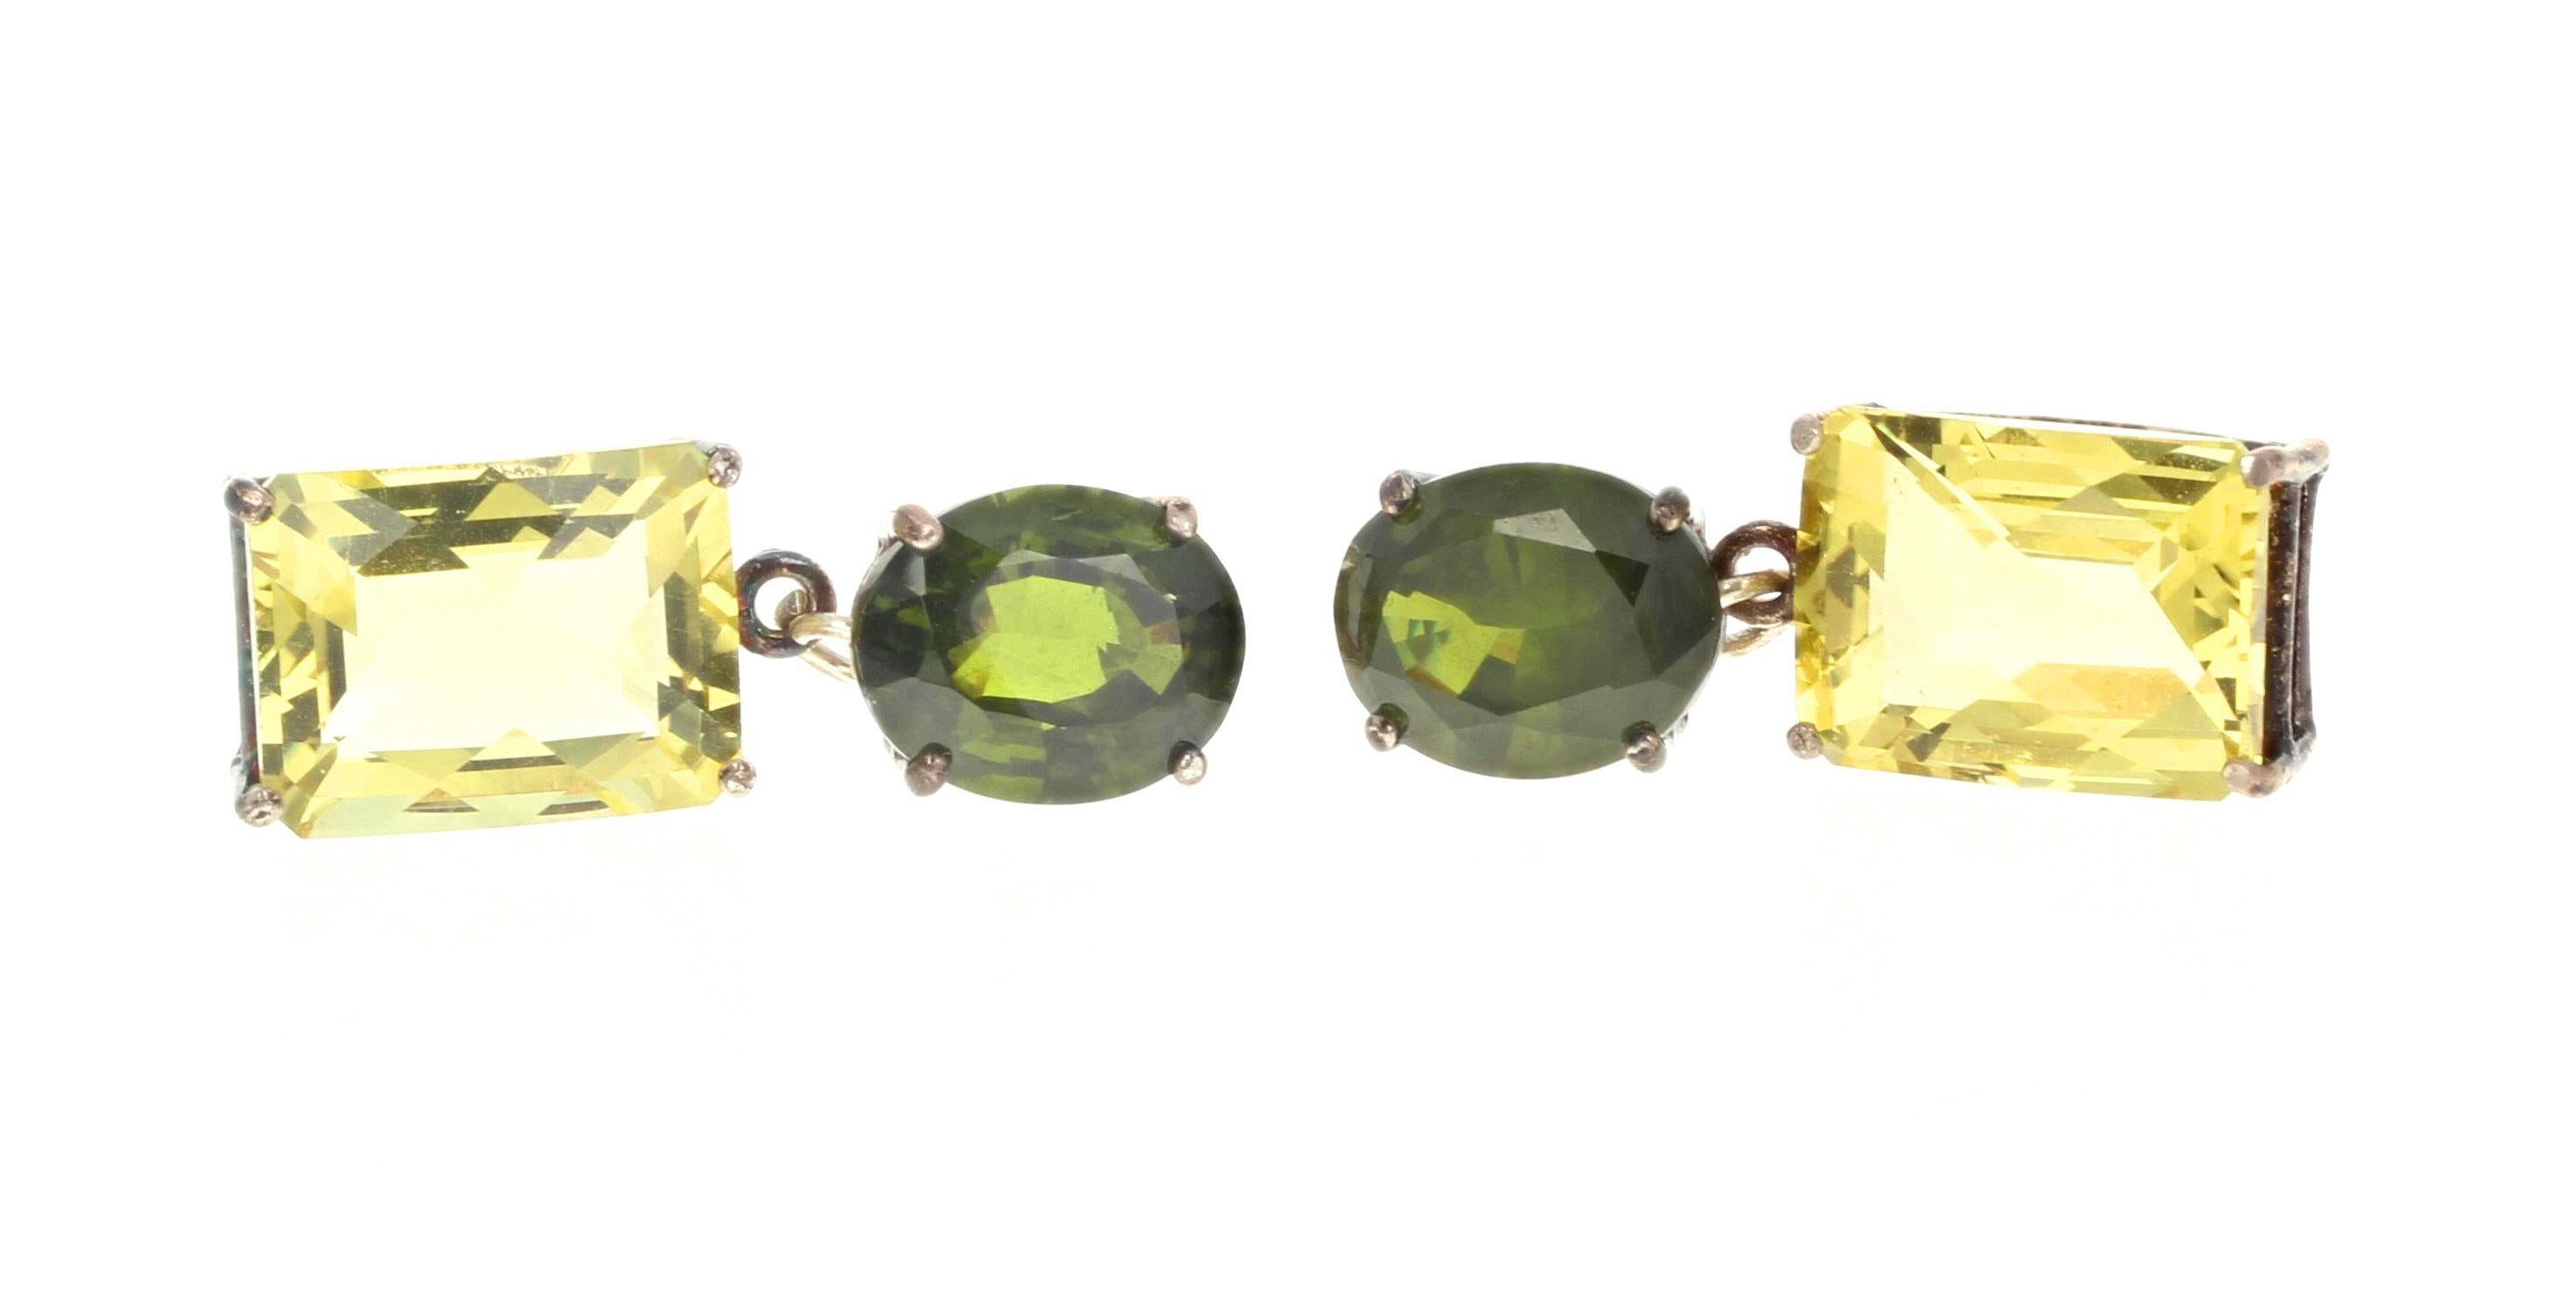 These fascinating real natural rare green oval Zircons are 8.77 carats total (10 1/2mm x 8 1/2mm) and the beautiful cushion cut natural Lemon Quartz total 15 carats (13mm x 9.8mm).  They hang approximately 27mm in these sterling silver easy to use